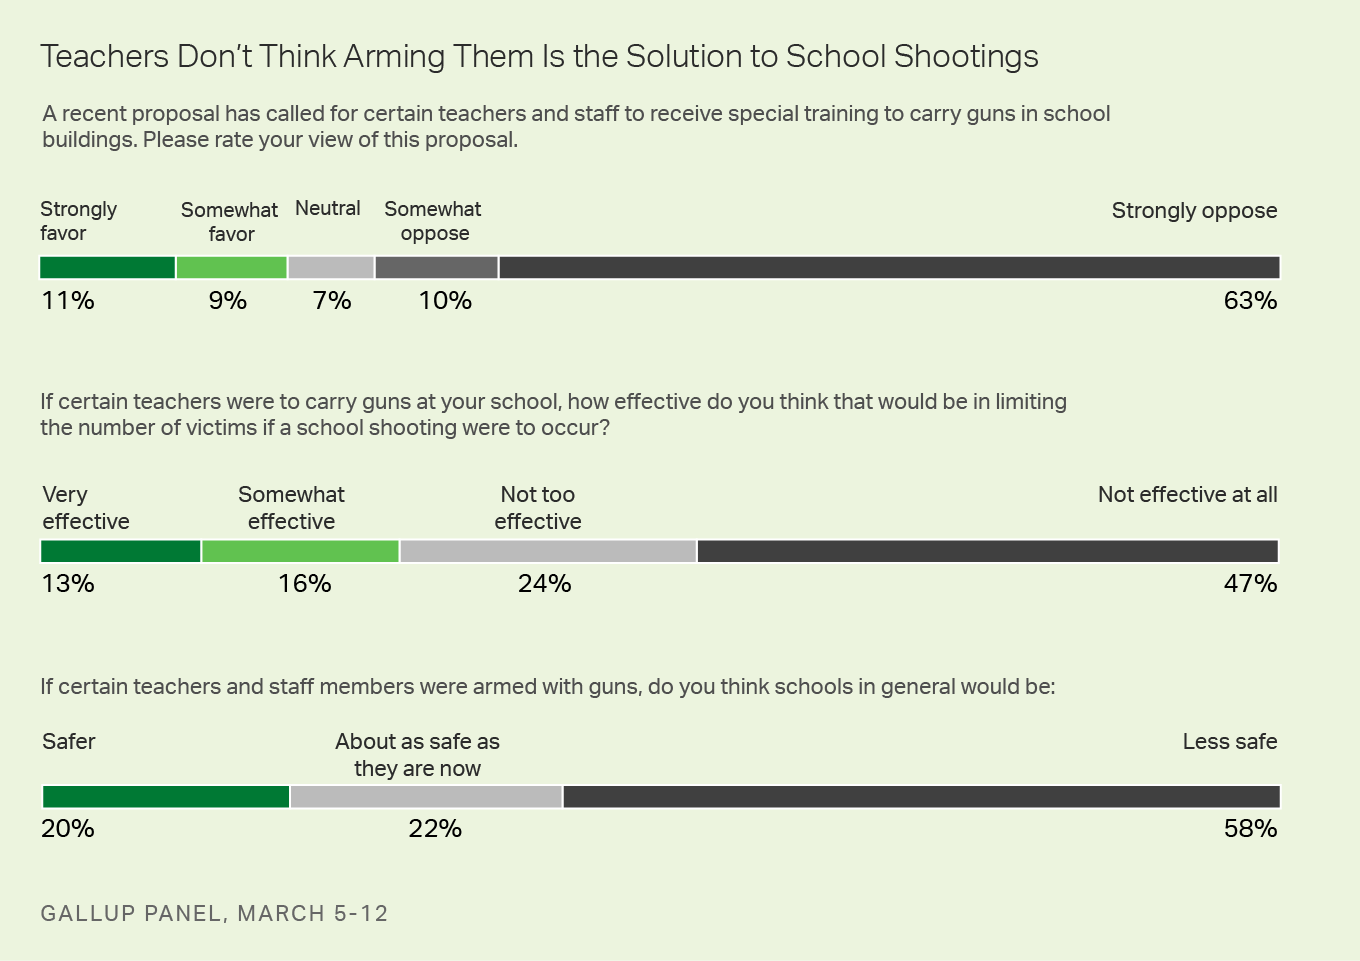 Teachers Don't think arming them is the solution to schcool shootings